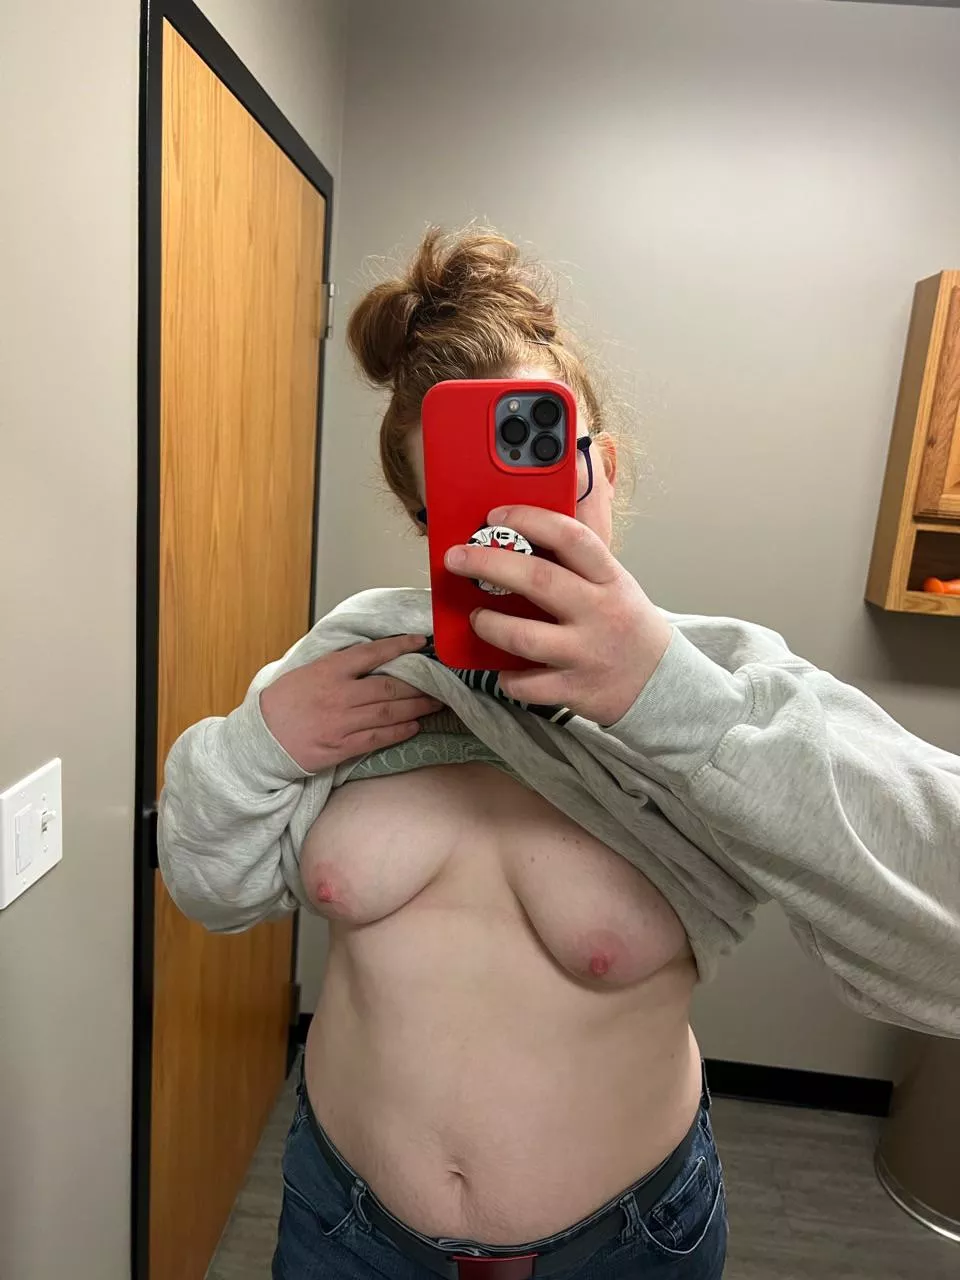 More Then A Mouth Full Is A Waste Nudes Slutwife Nude Pics Org